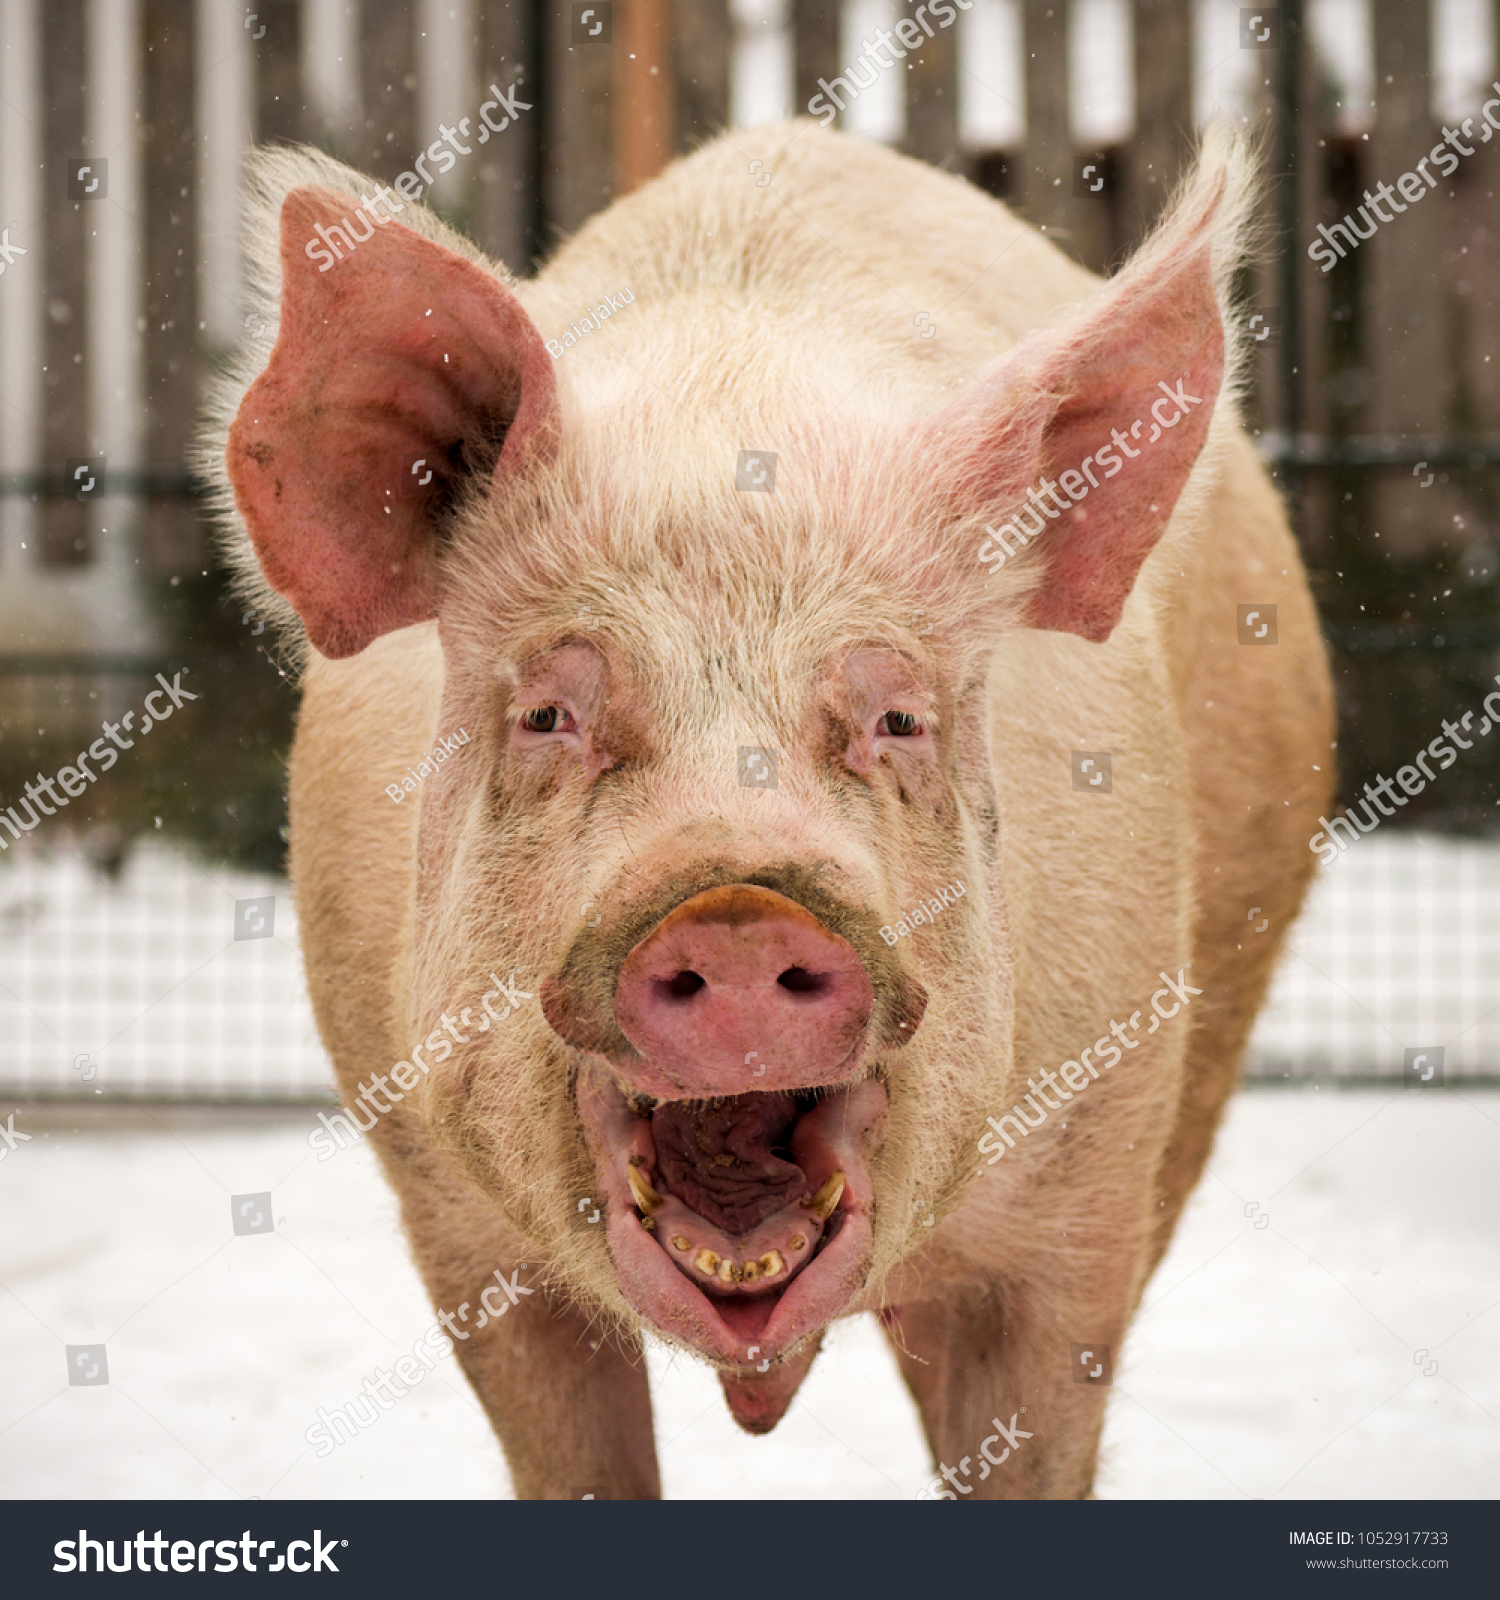 the body of the pig Pig who laughs 